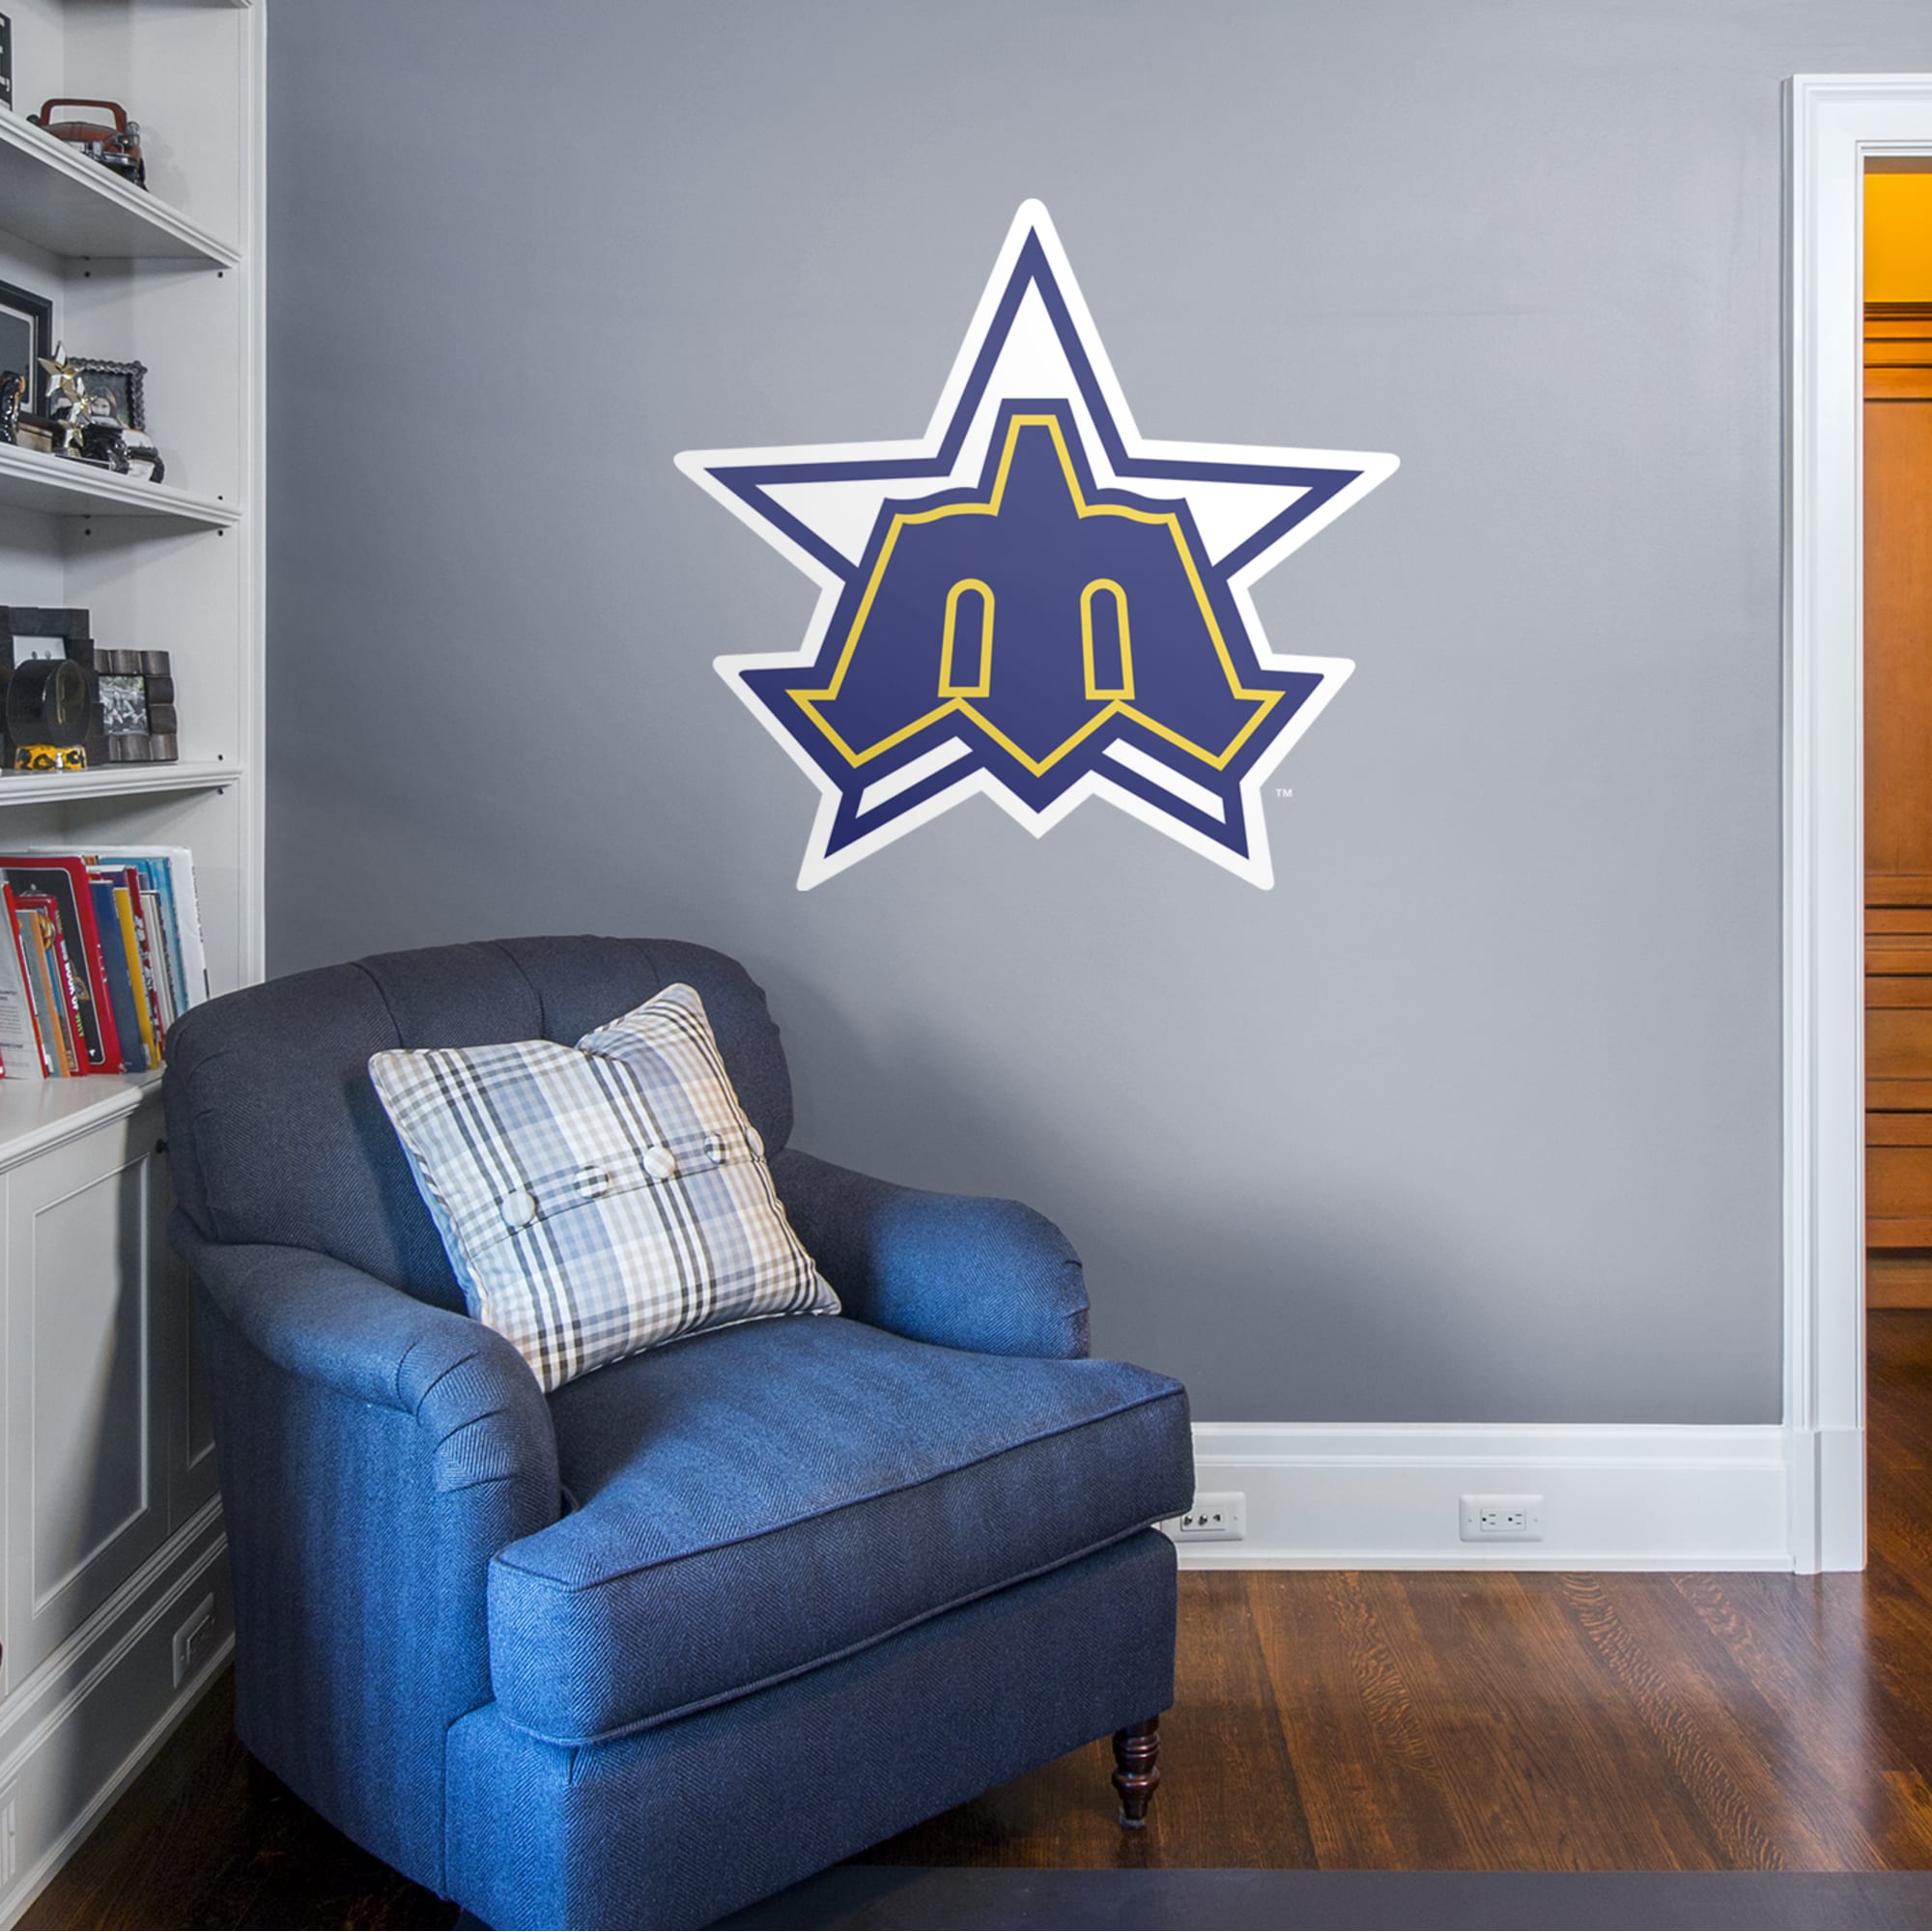 Seattle Mariners: Classic Logo - Officially Licensed MLB Removable Wall Decal 41.0"W x 39.0"H by Fathead | Vinyl